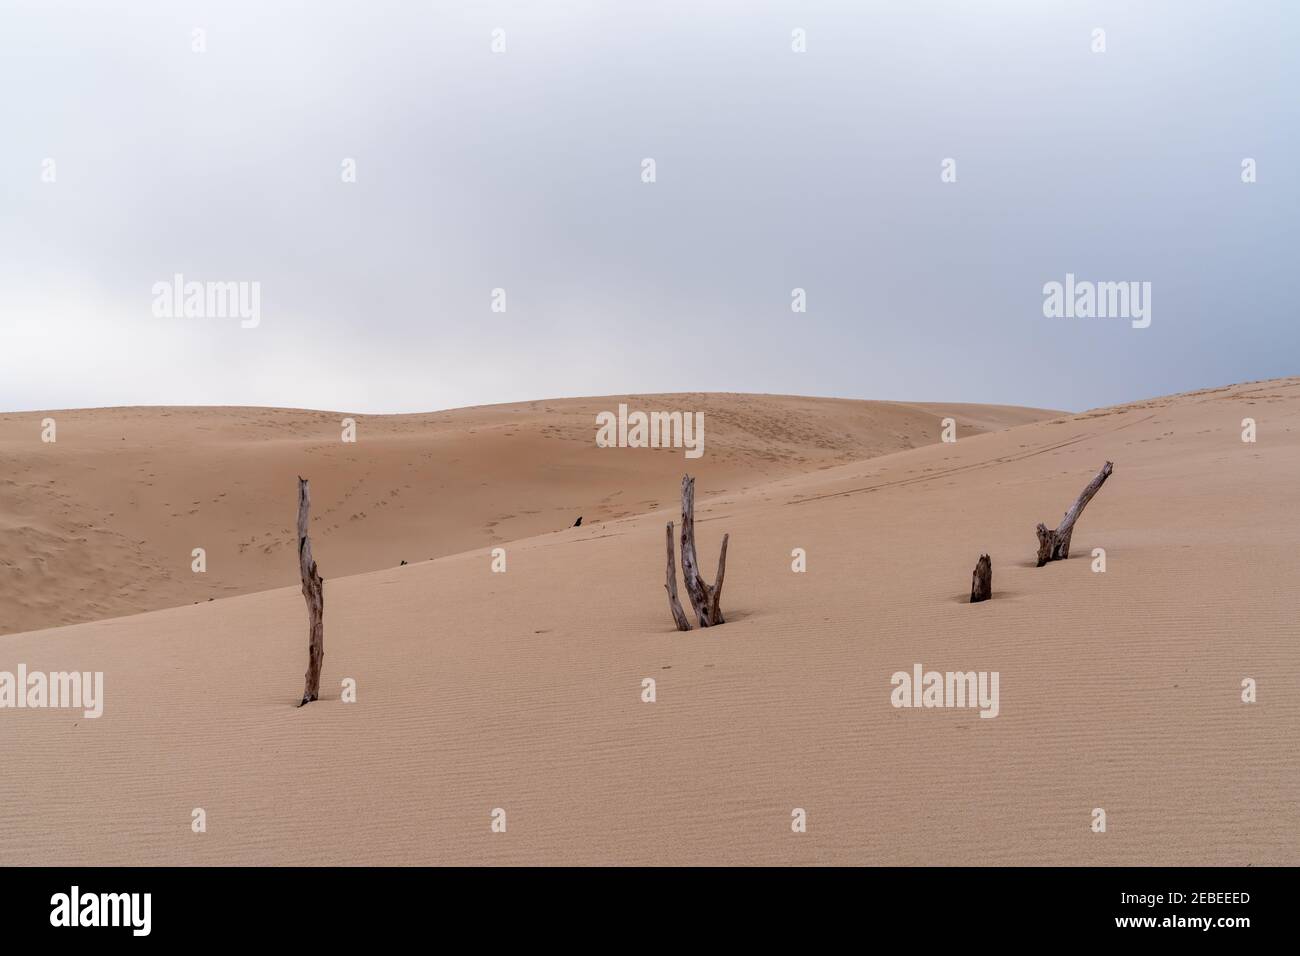 wild desert landscape and large sand dune with under an overcast evening sky with dead trees in the foreground Stock Photo